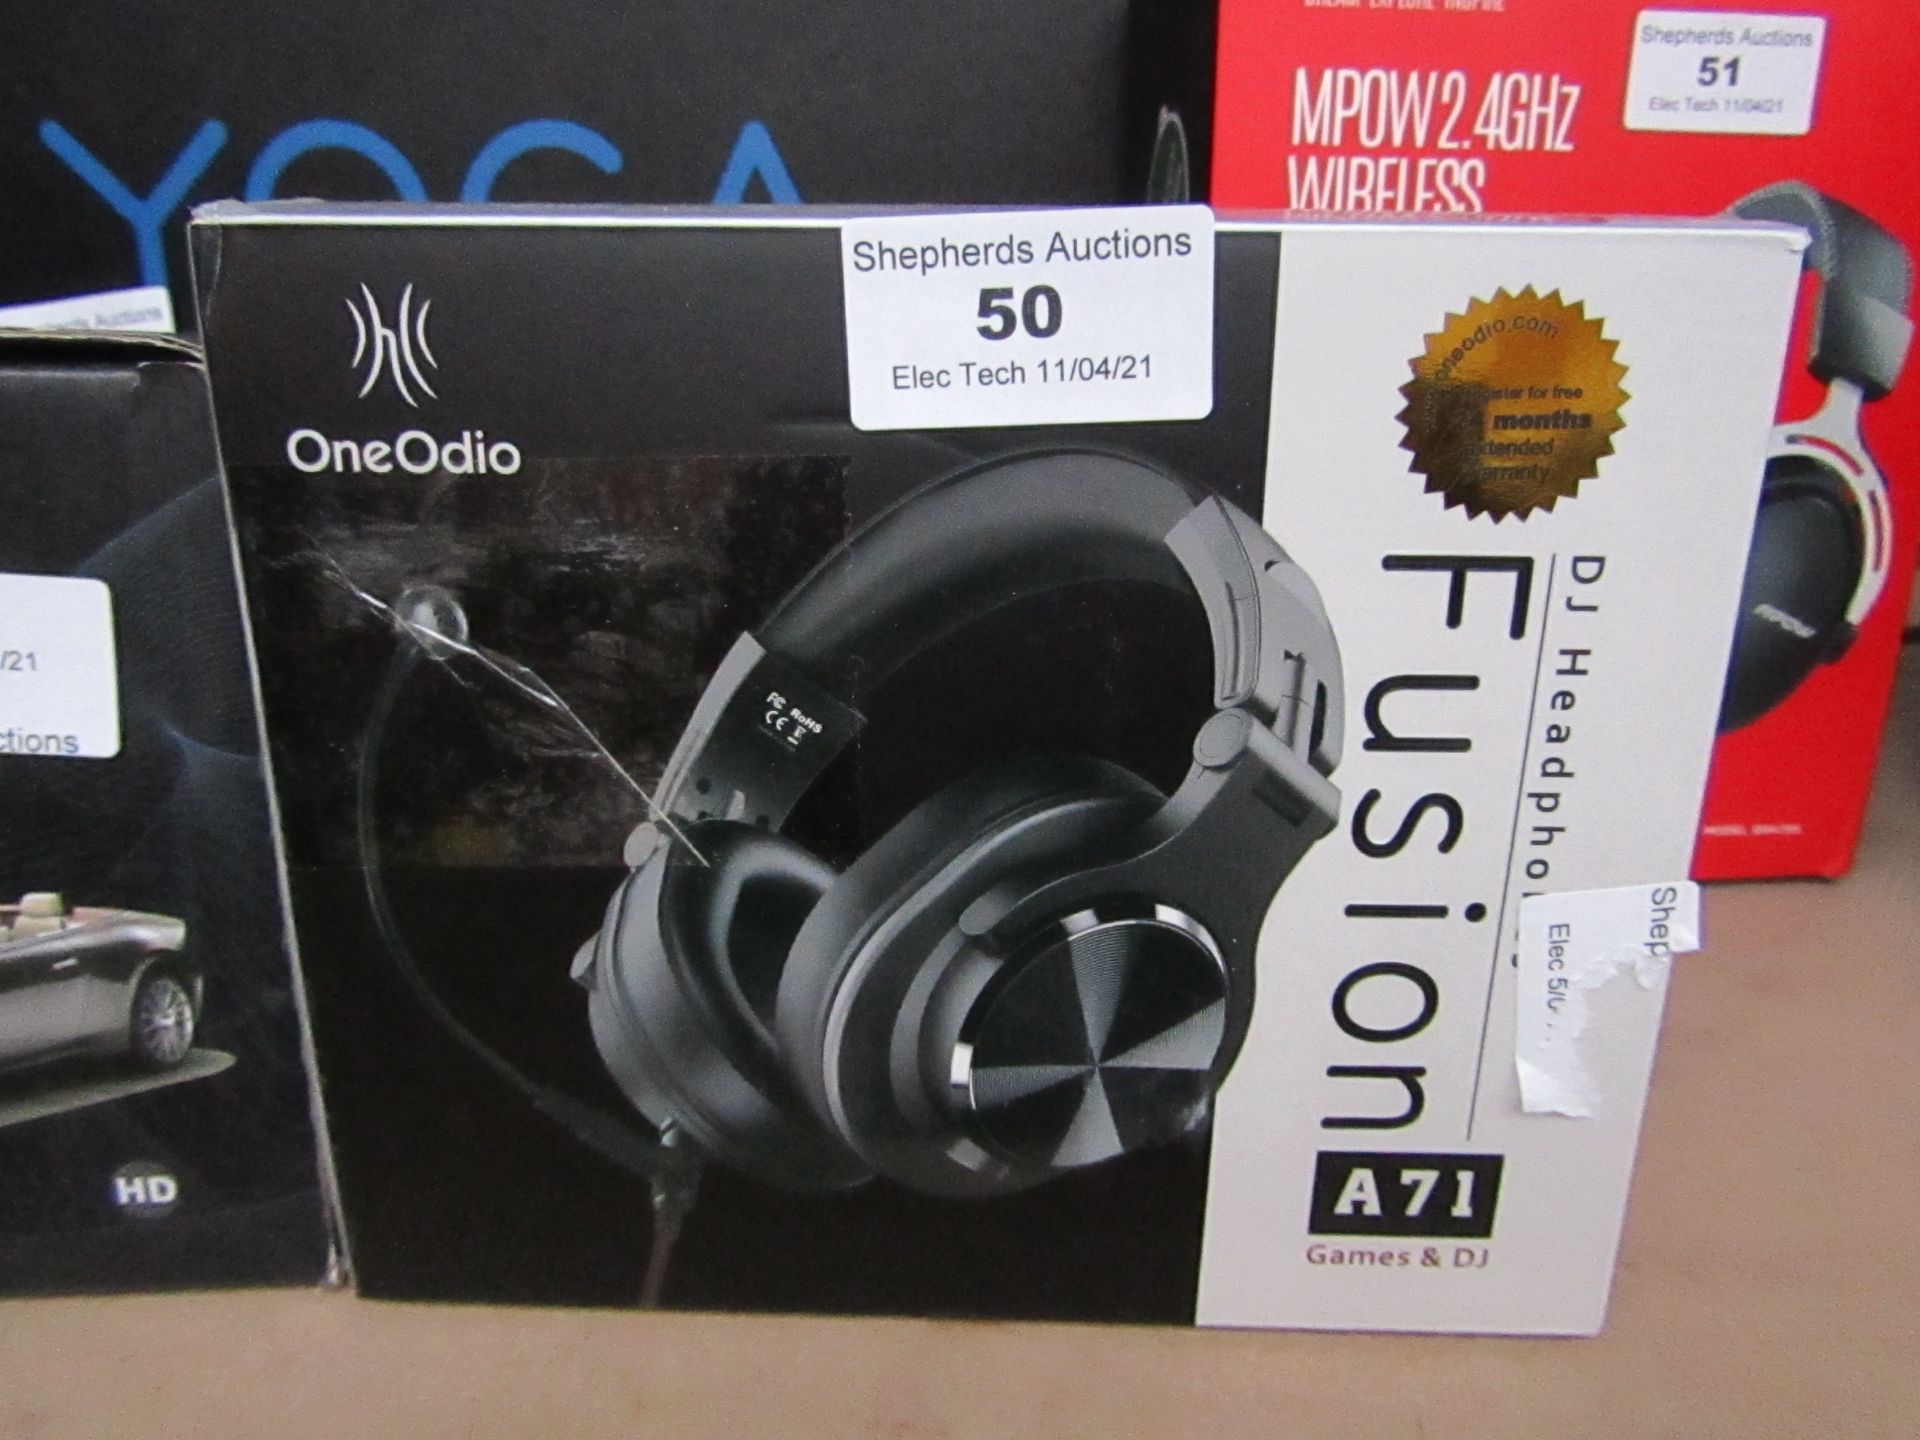 One Odio Fusion DJ headphones, unchecked and boxed.